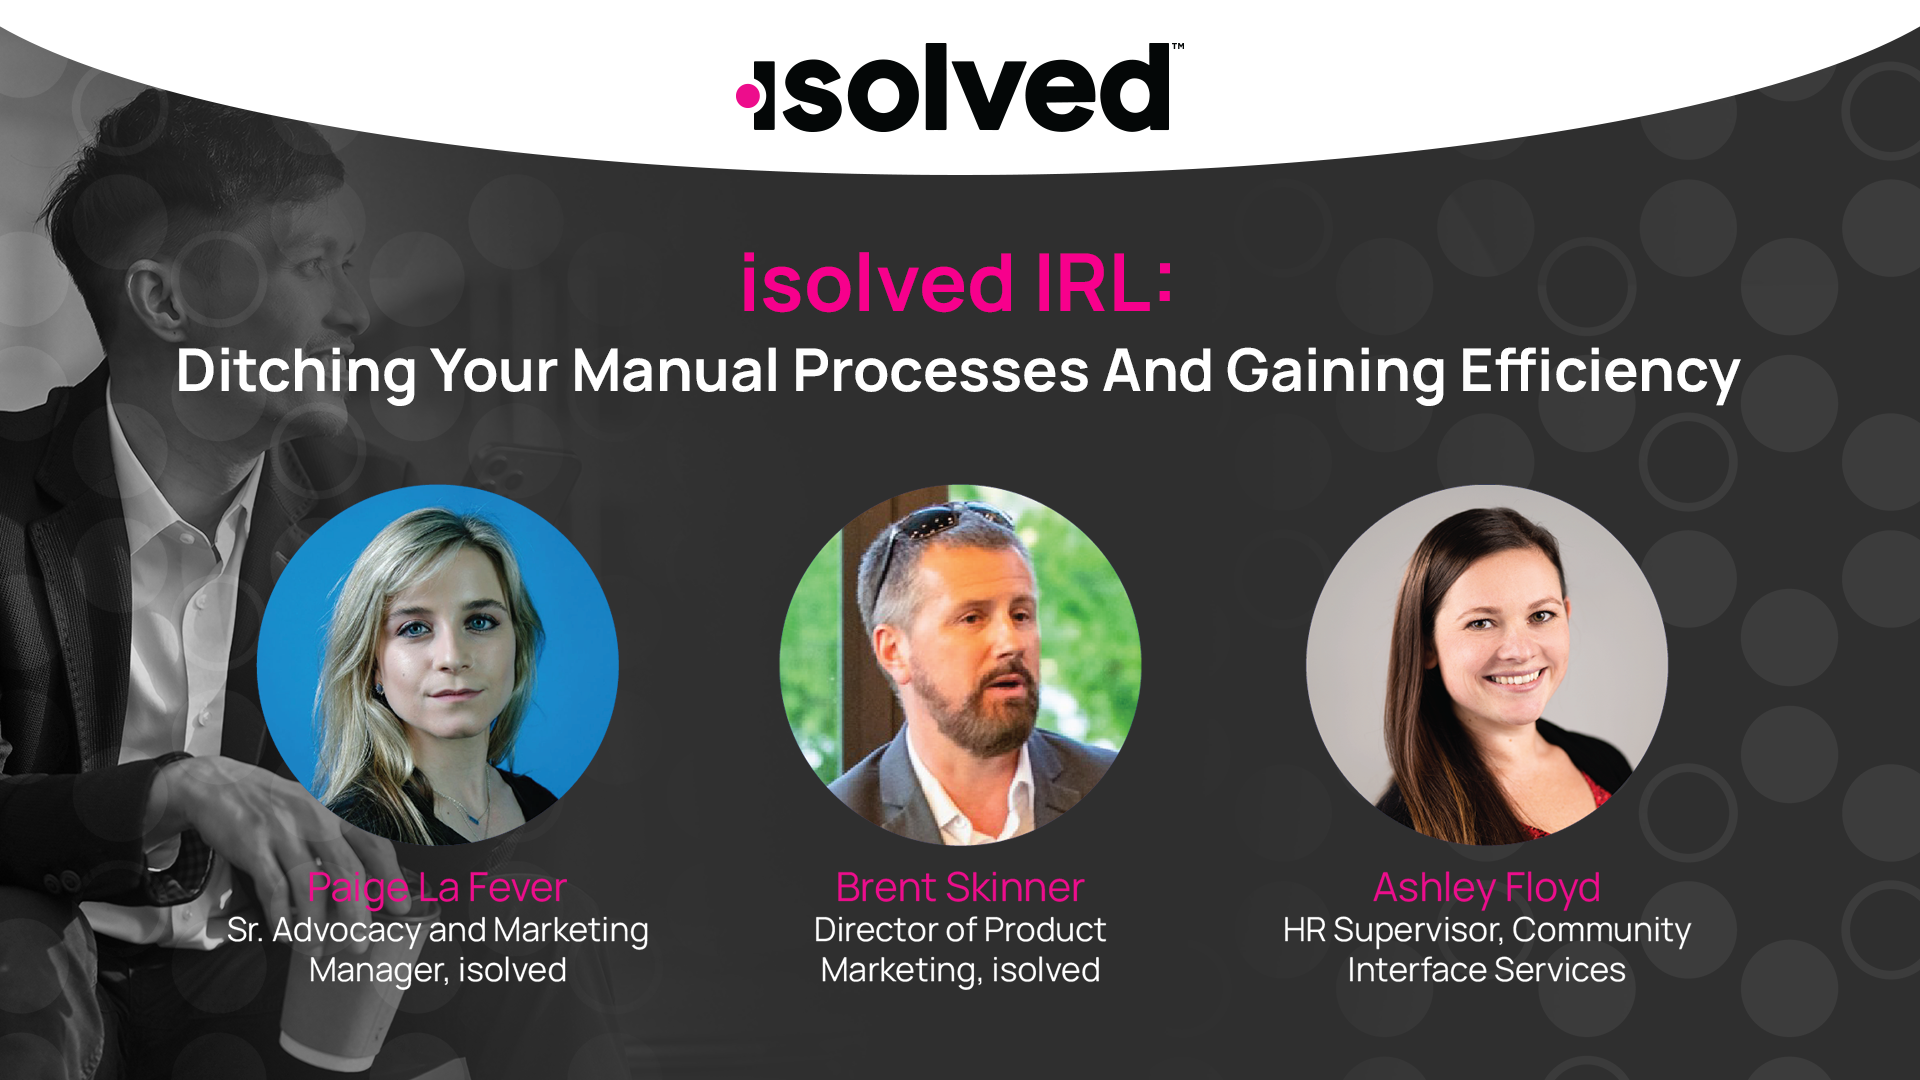 isolved IRL:  Ditching Your Manual Processes and Gaining Efficiency